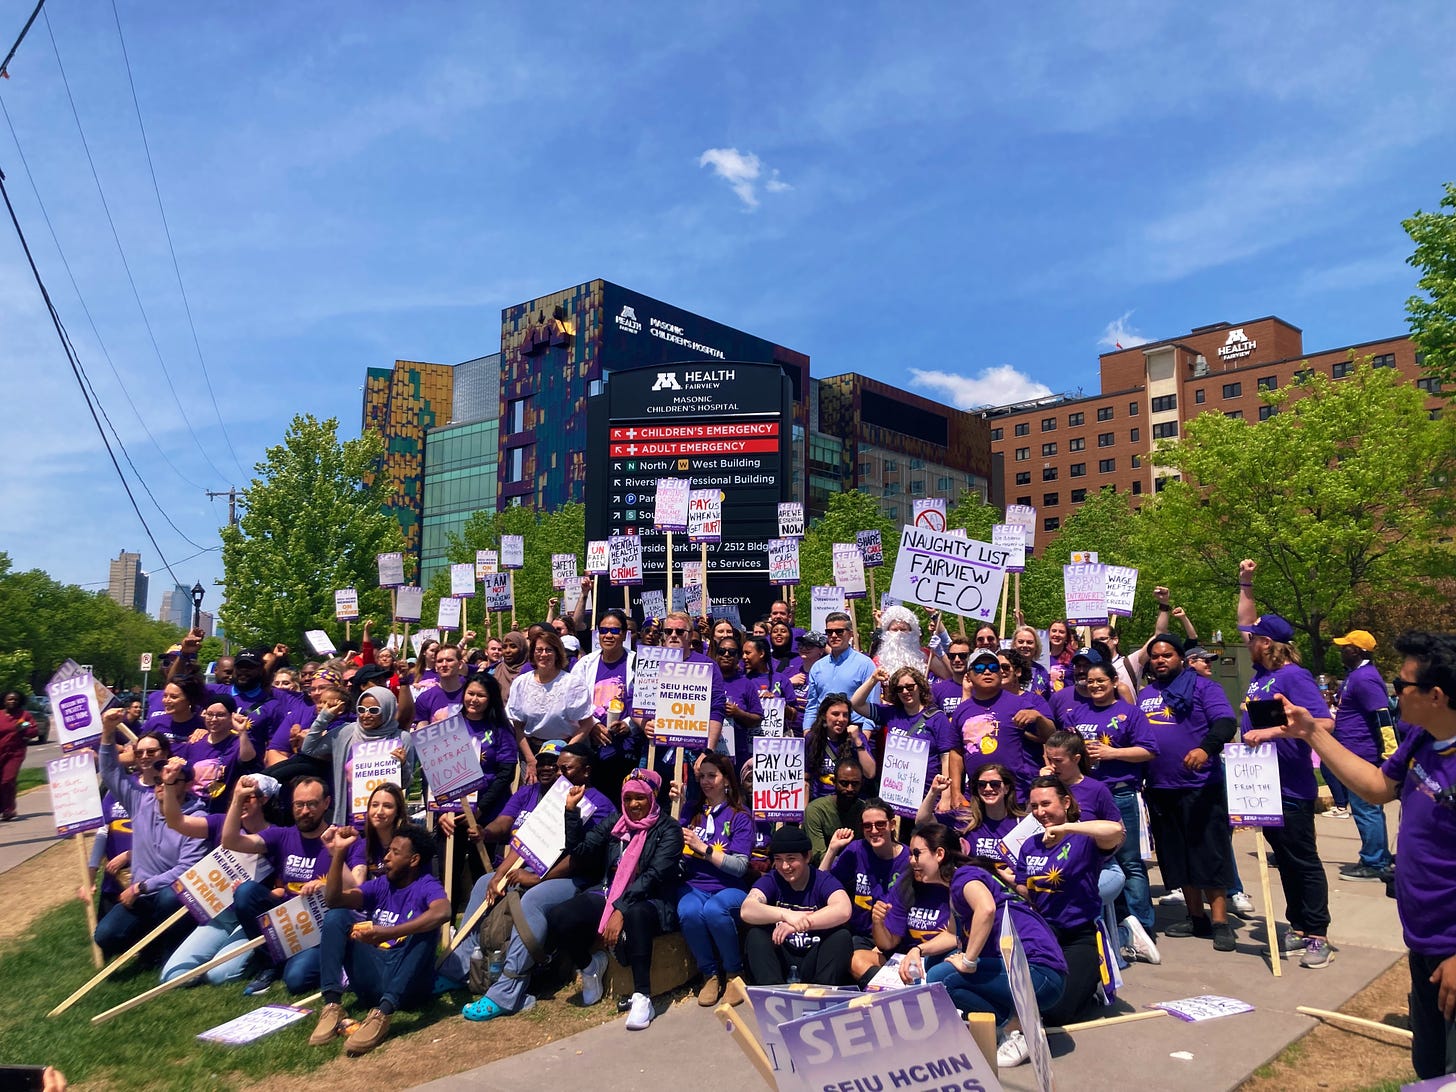 a large crowd of people wearing purple tee shirts and holding picket signs gather in front of the m health fairview riverside hospital sign on the sidewalk